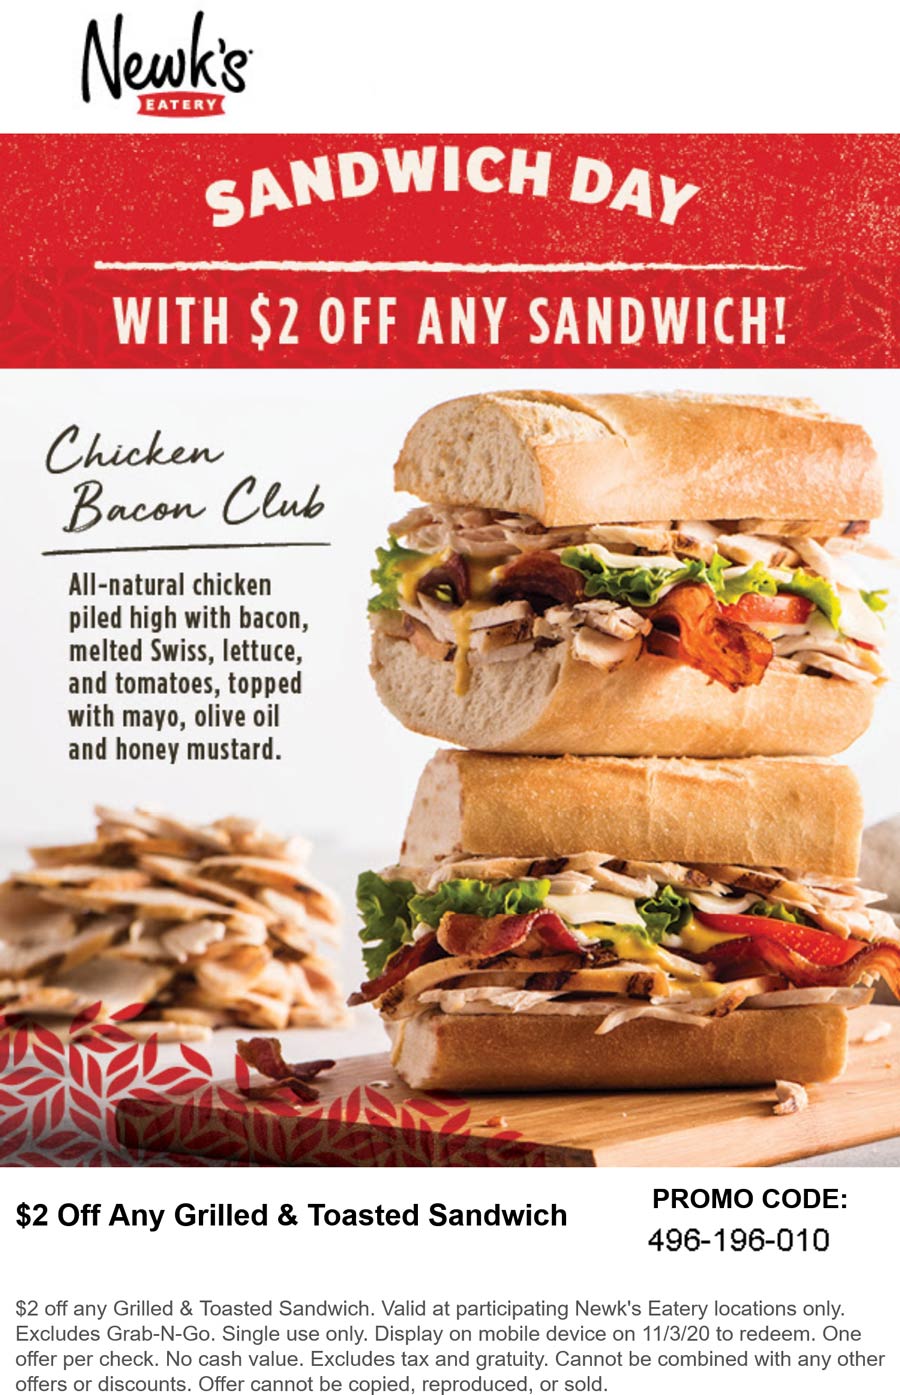 $2 off any sandwich today at Newks Eatery #newkseatery | The Coupons App®